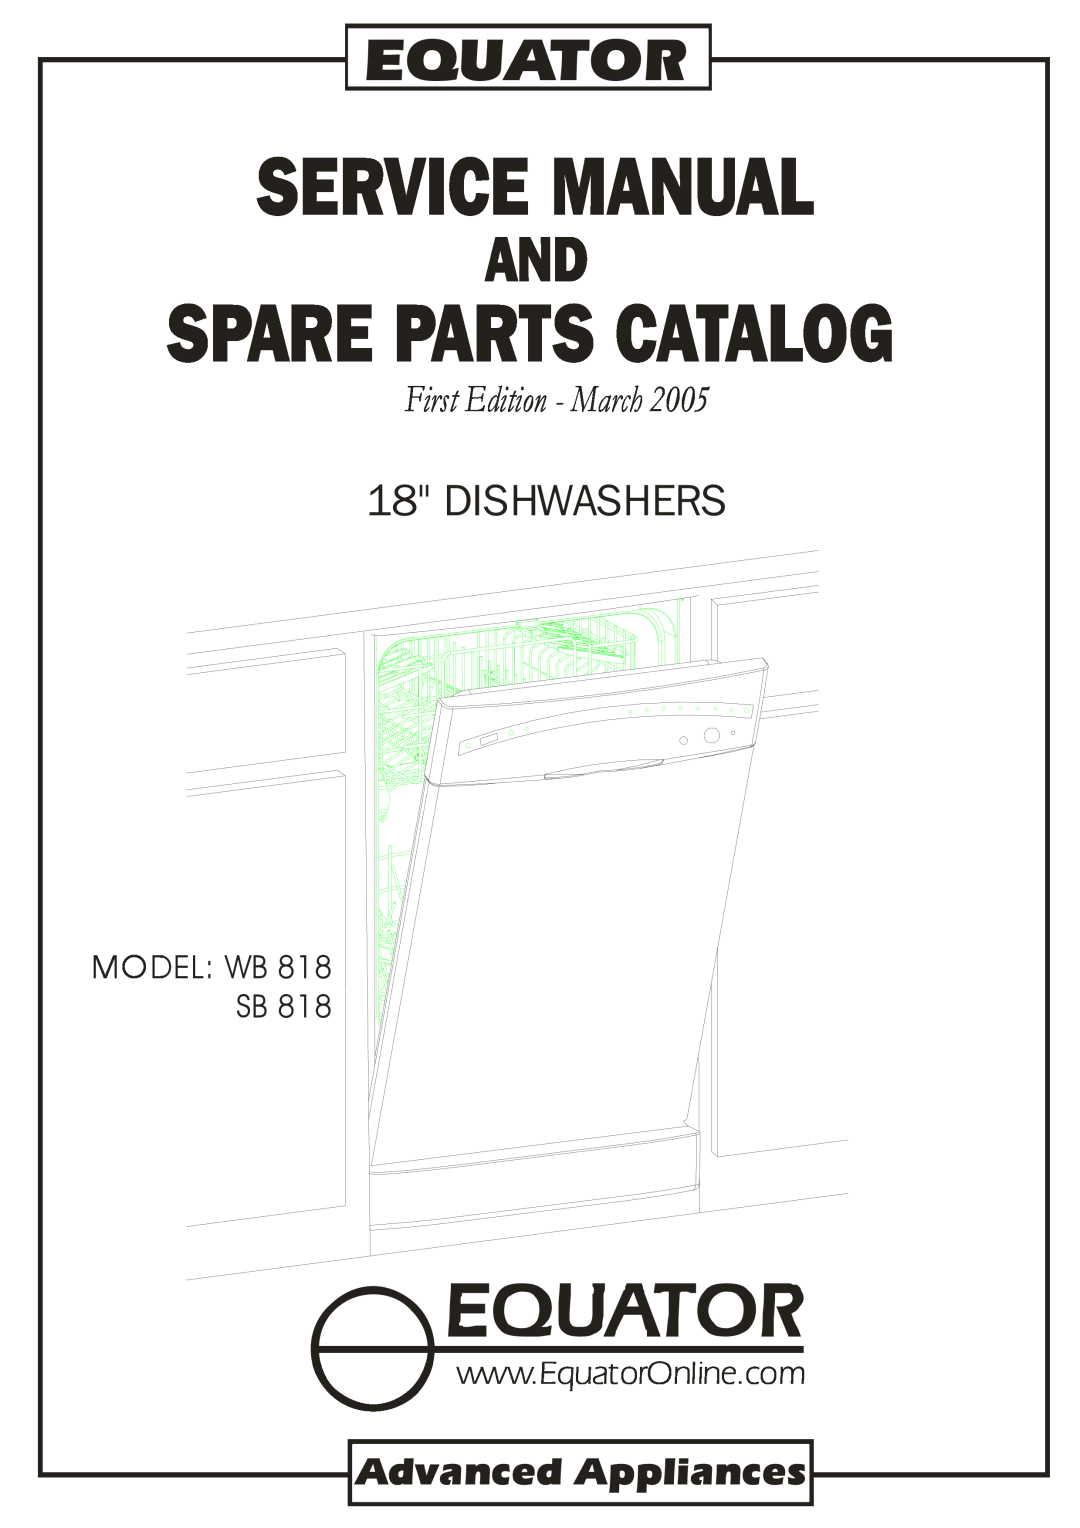 Equator SB 818, WB 818 service manual Service Manual, Spare Parts Catalog, Equator, Dishwashers, First Edition - March 